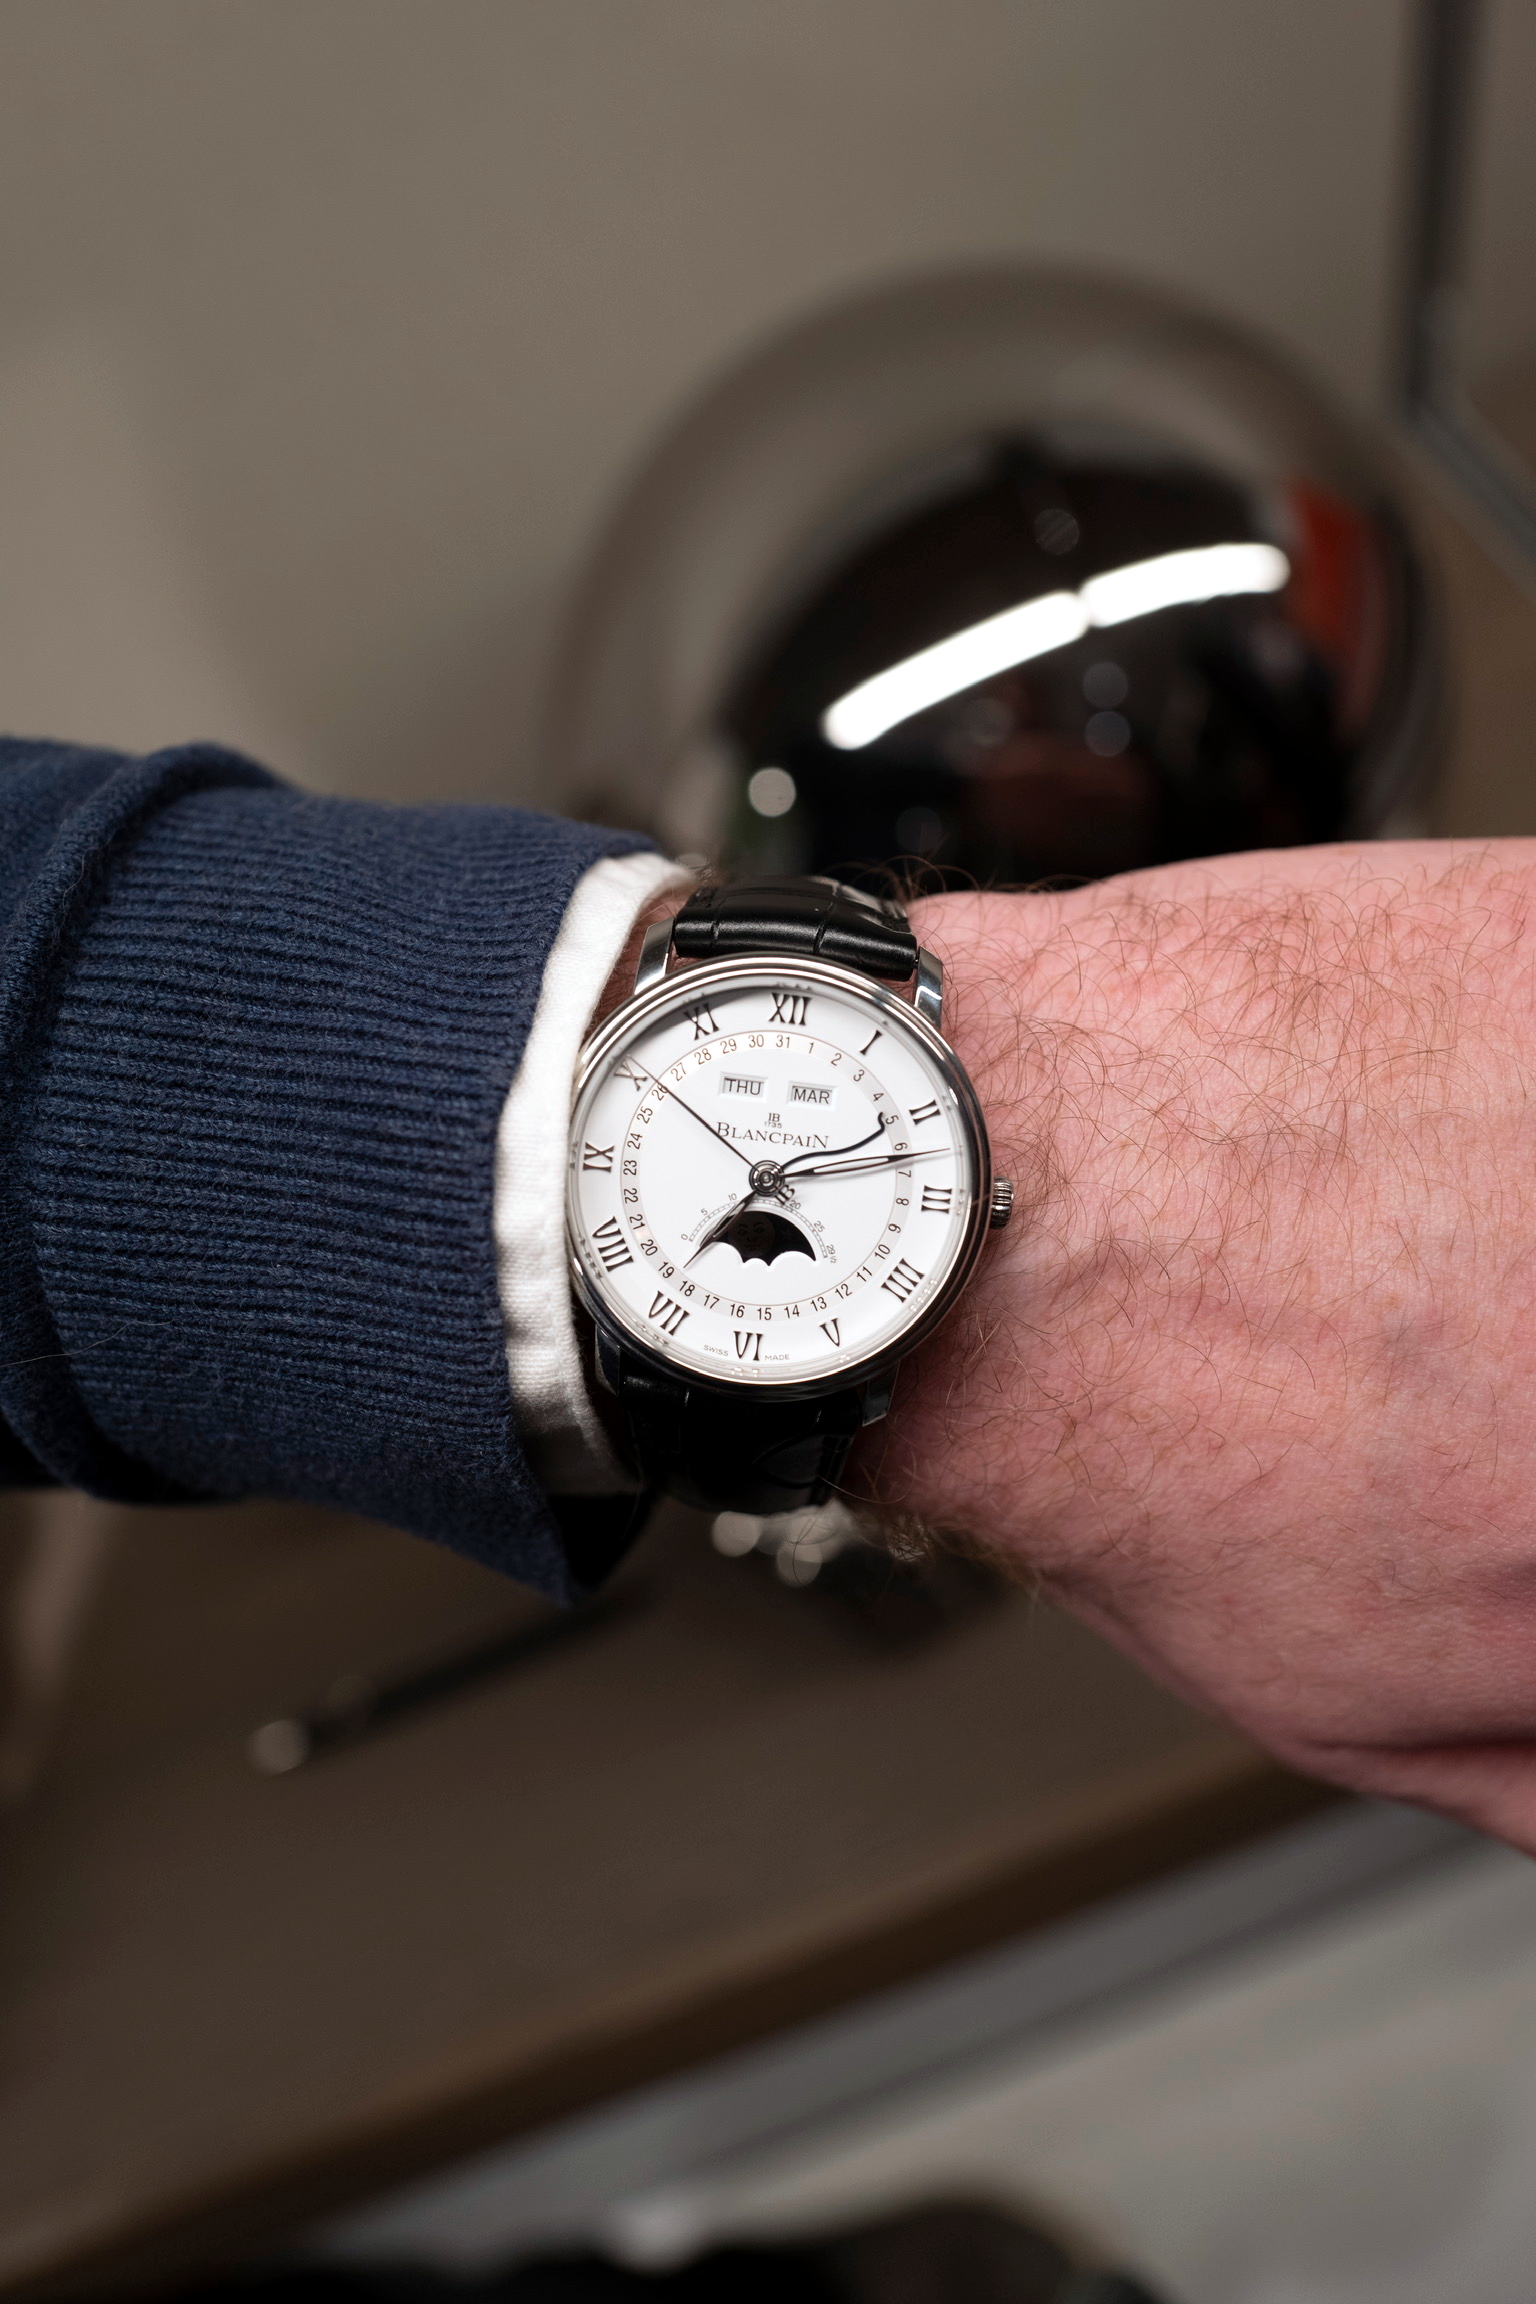 Blancpain Villeret shot on Leica in portrait which is better for watch photography